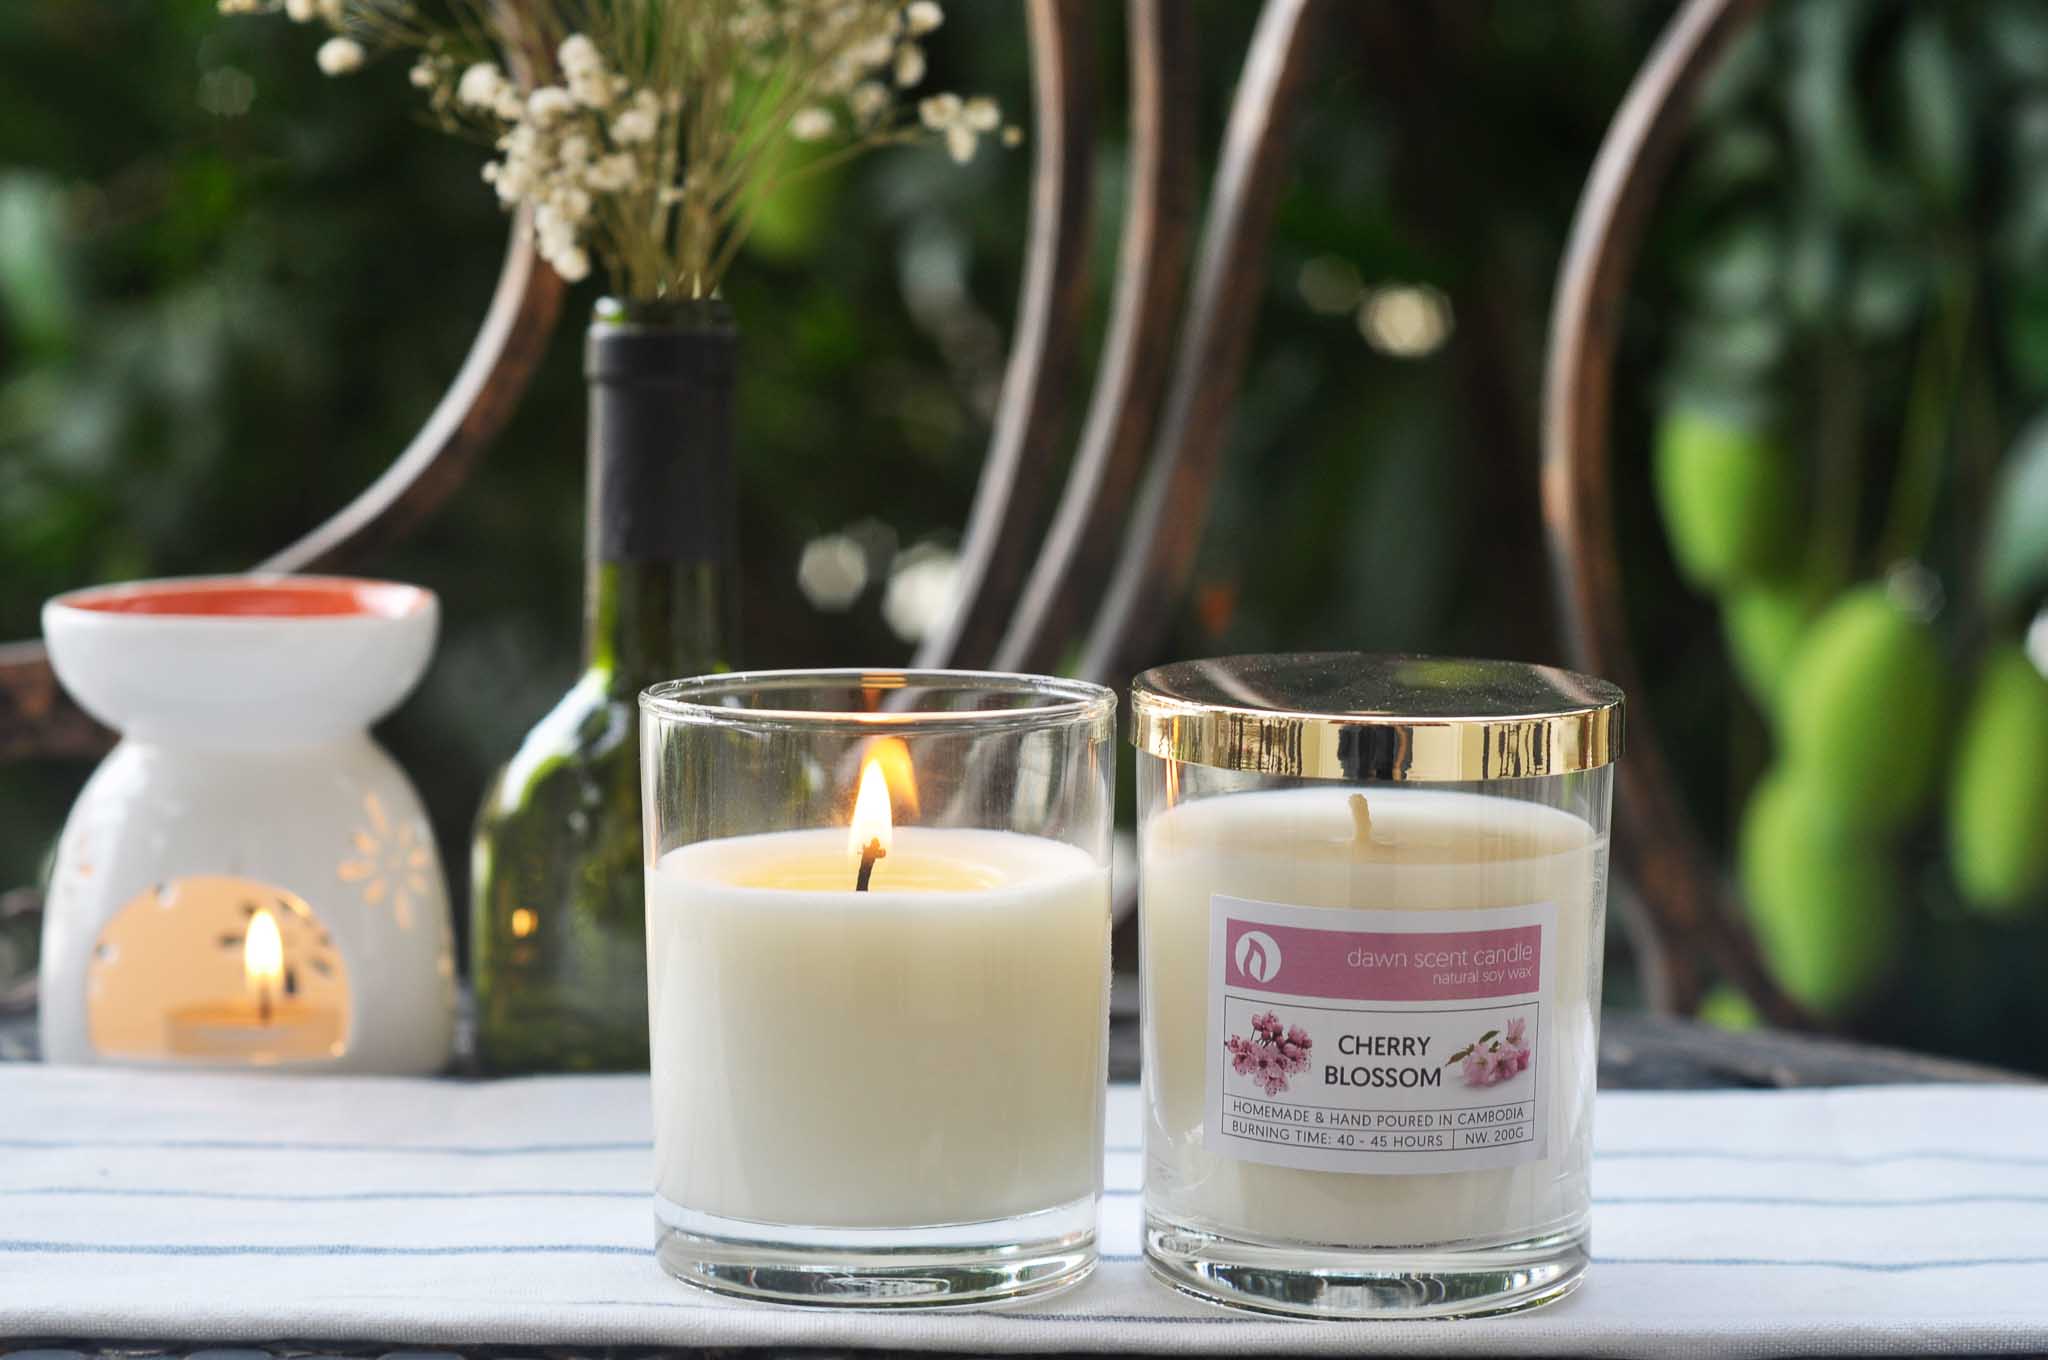 Image Courtesy: Dawn​ ​Scent​ ​Candle​